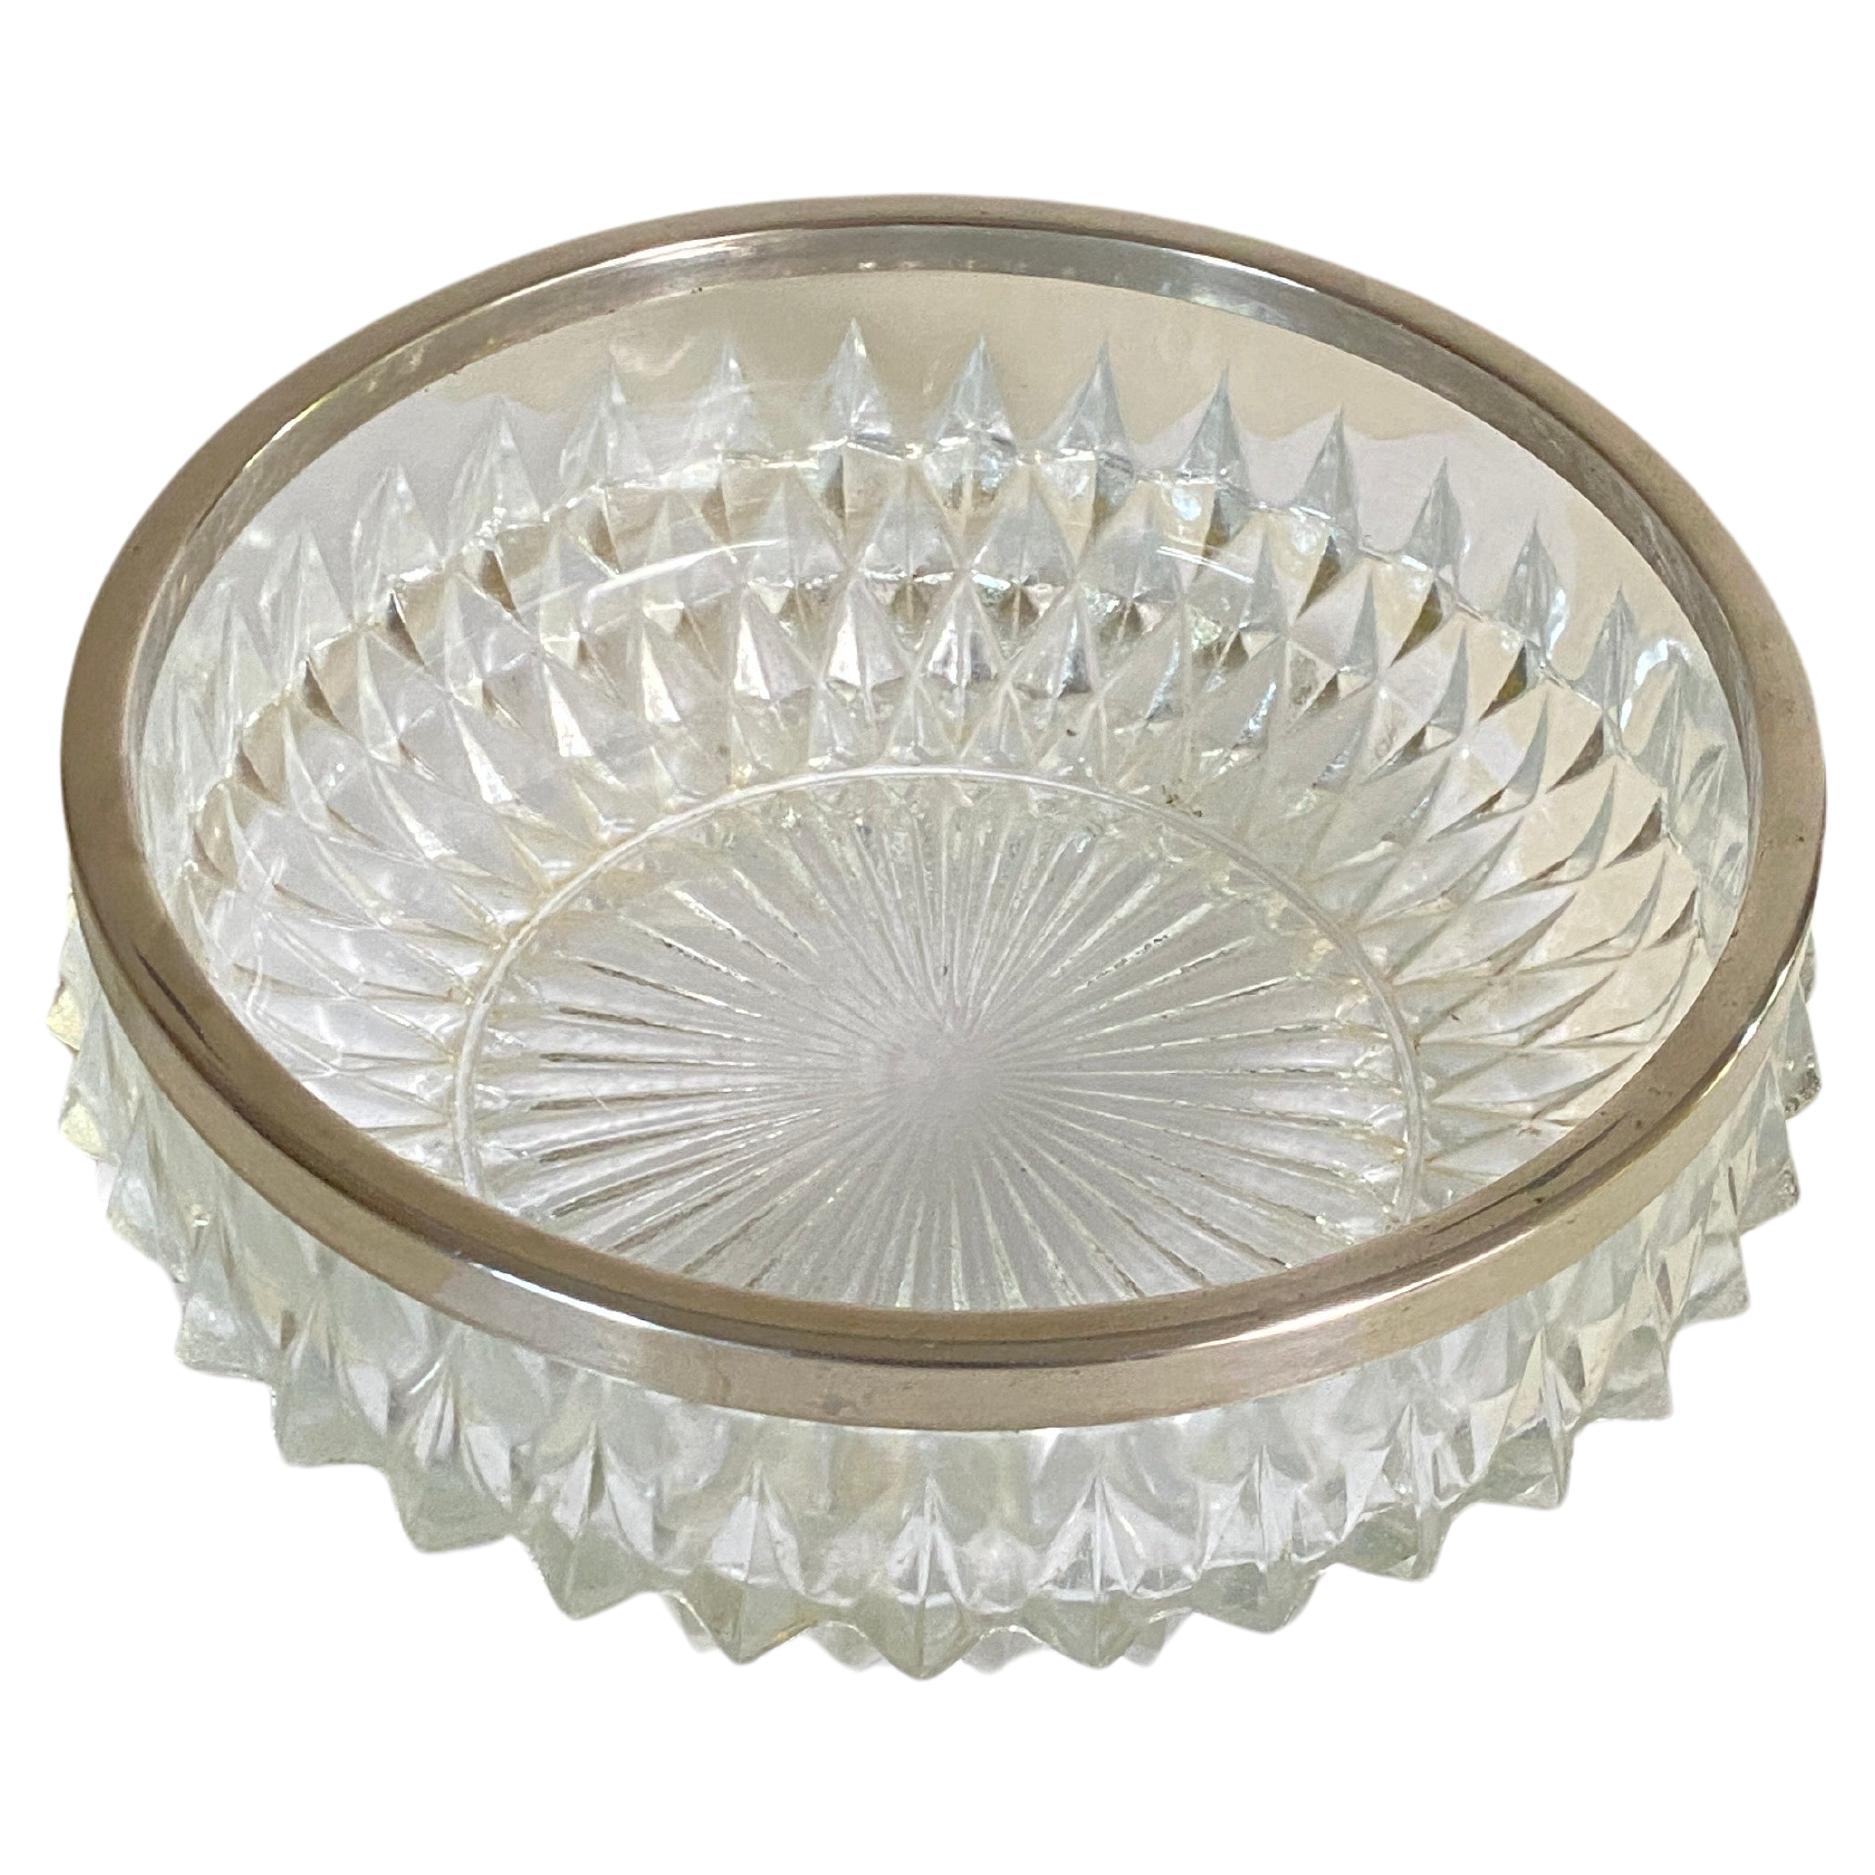 French Art Deco glass and Metal decorative dish with glass Rond Pattern, in very good overall condition. It has been made in France cDuring the 20th Century.
Transparent Color.